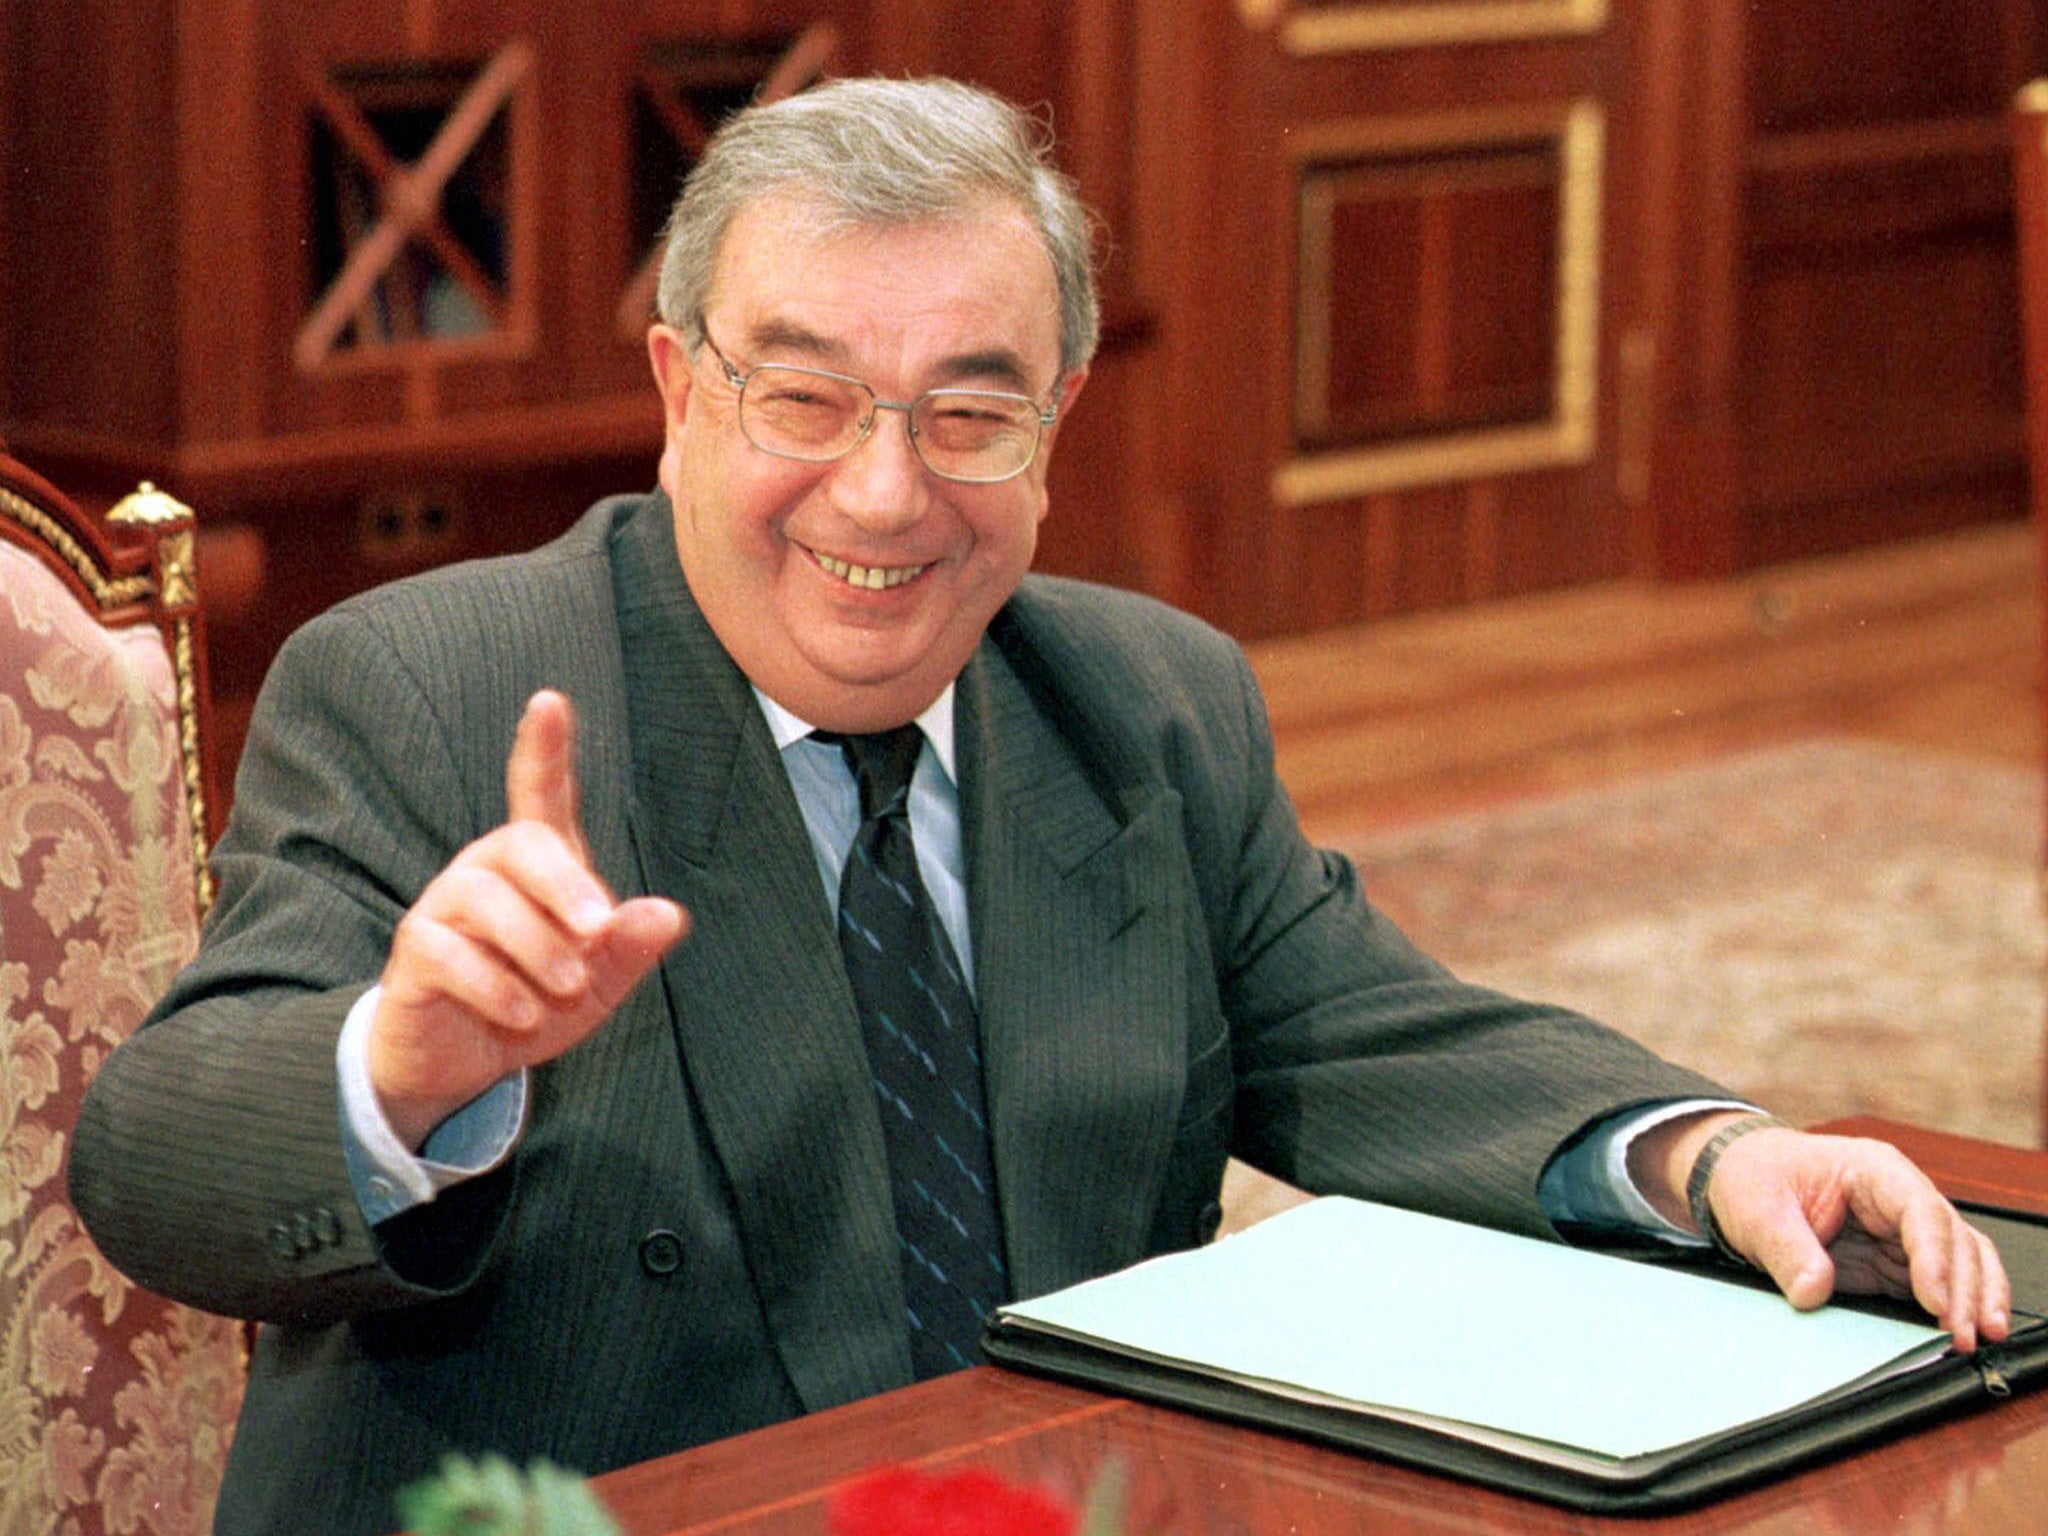 Primakov meets the press at the Kremlin in 1998; he told John Le Carré that he identified with the character of George Smiley